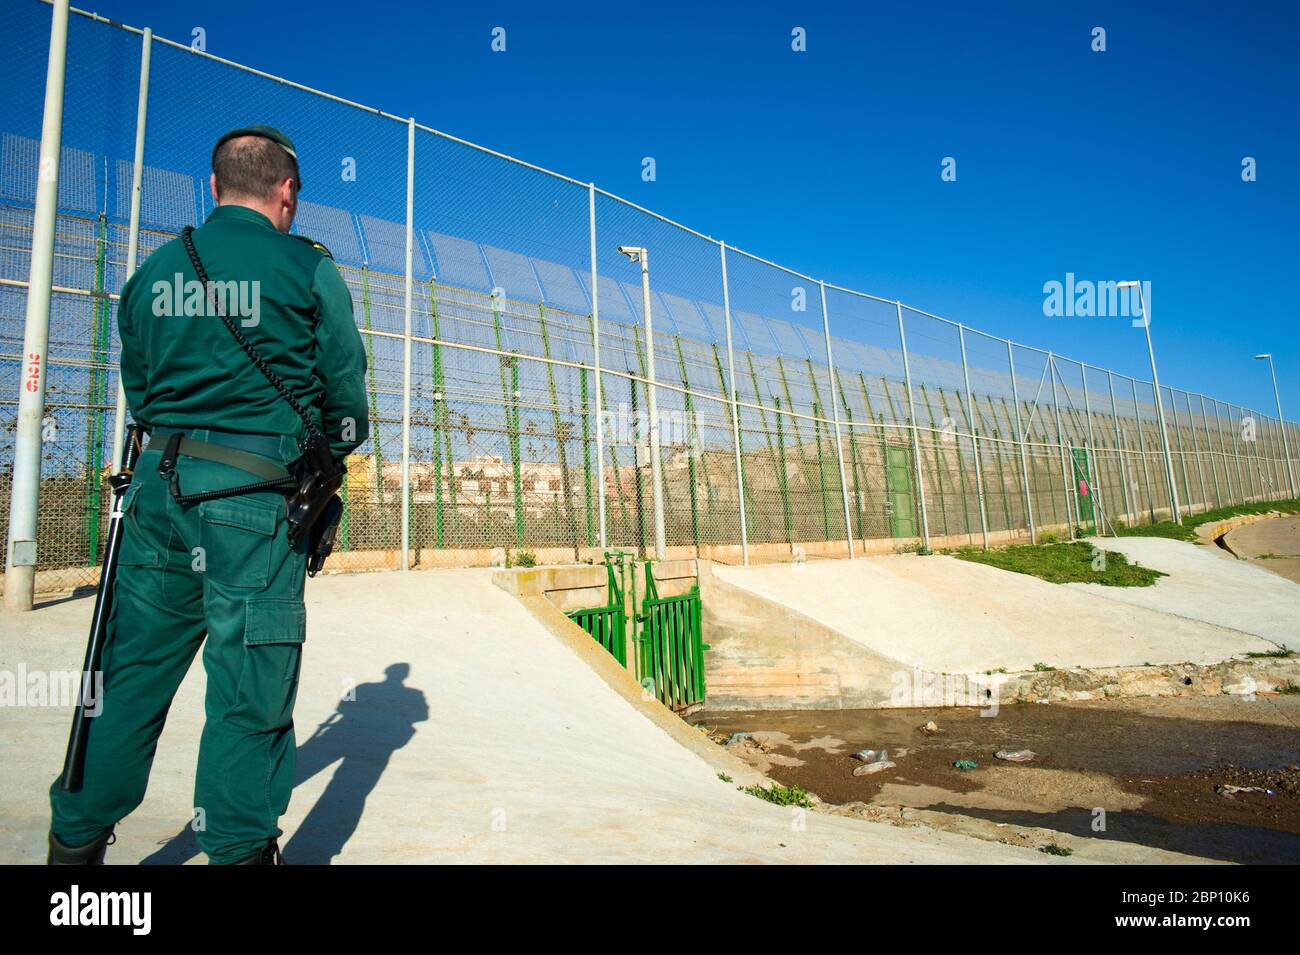 MELILLA,SPAIN-APRIL 19 : A Guardia Civil stands near the perimeter fence that separates the Spanish enclave of Melilla and Morocco on April 19,2010 in Melilla, Spain. The fence which marks the border around the Spanish enclave in northern Morocco was build to discourage illegal immigrants from attempting to enter to Melilla. ( Photo by Jordi Cami) Stock Photo